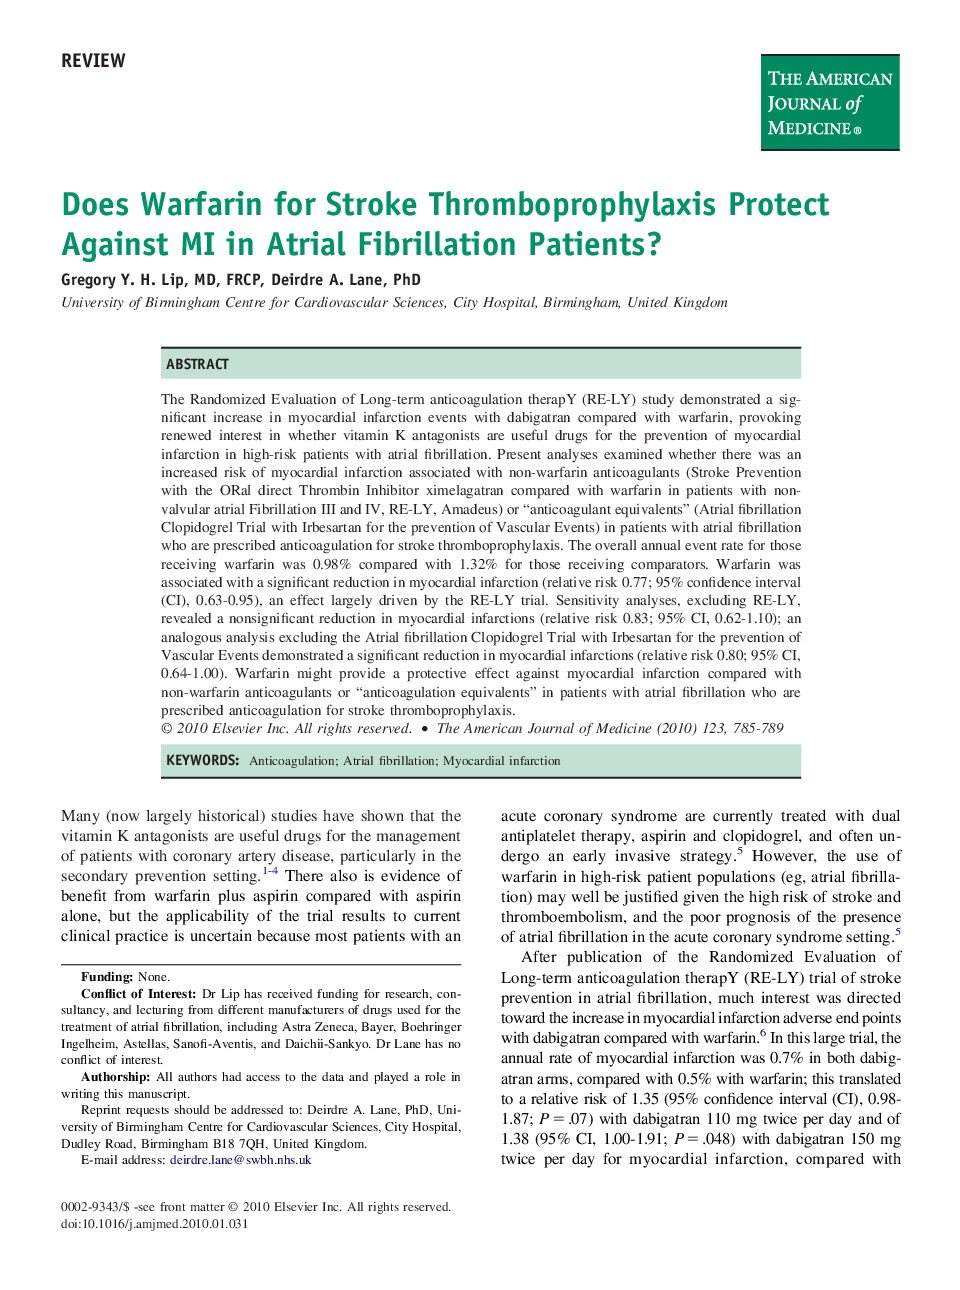 Does Warfarin for Stroke Thromboprophylaxis Protect Against MI in Atrial Fibrillation Patients? 